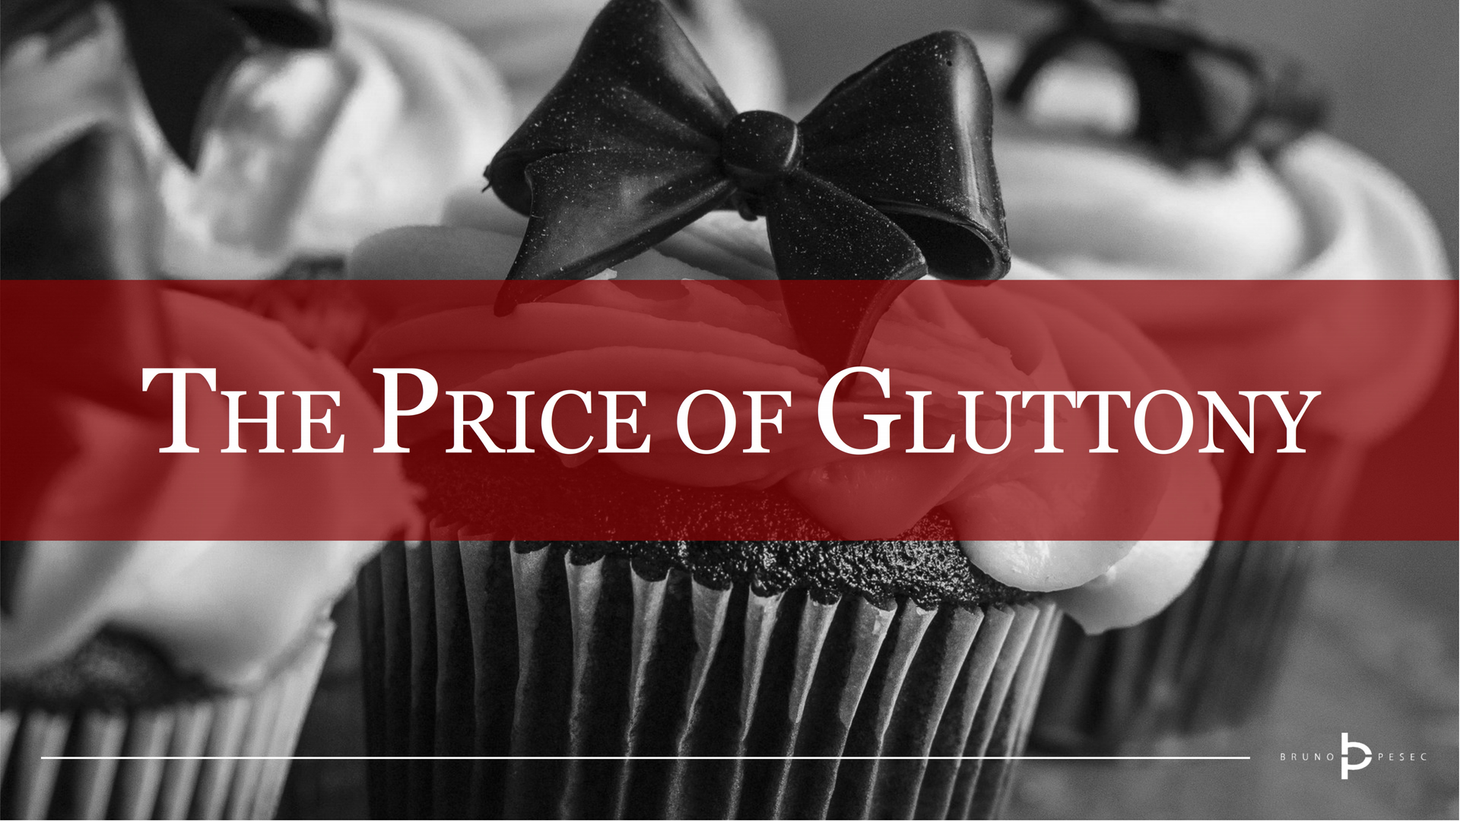 The price of gluttony